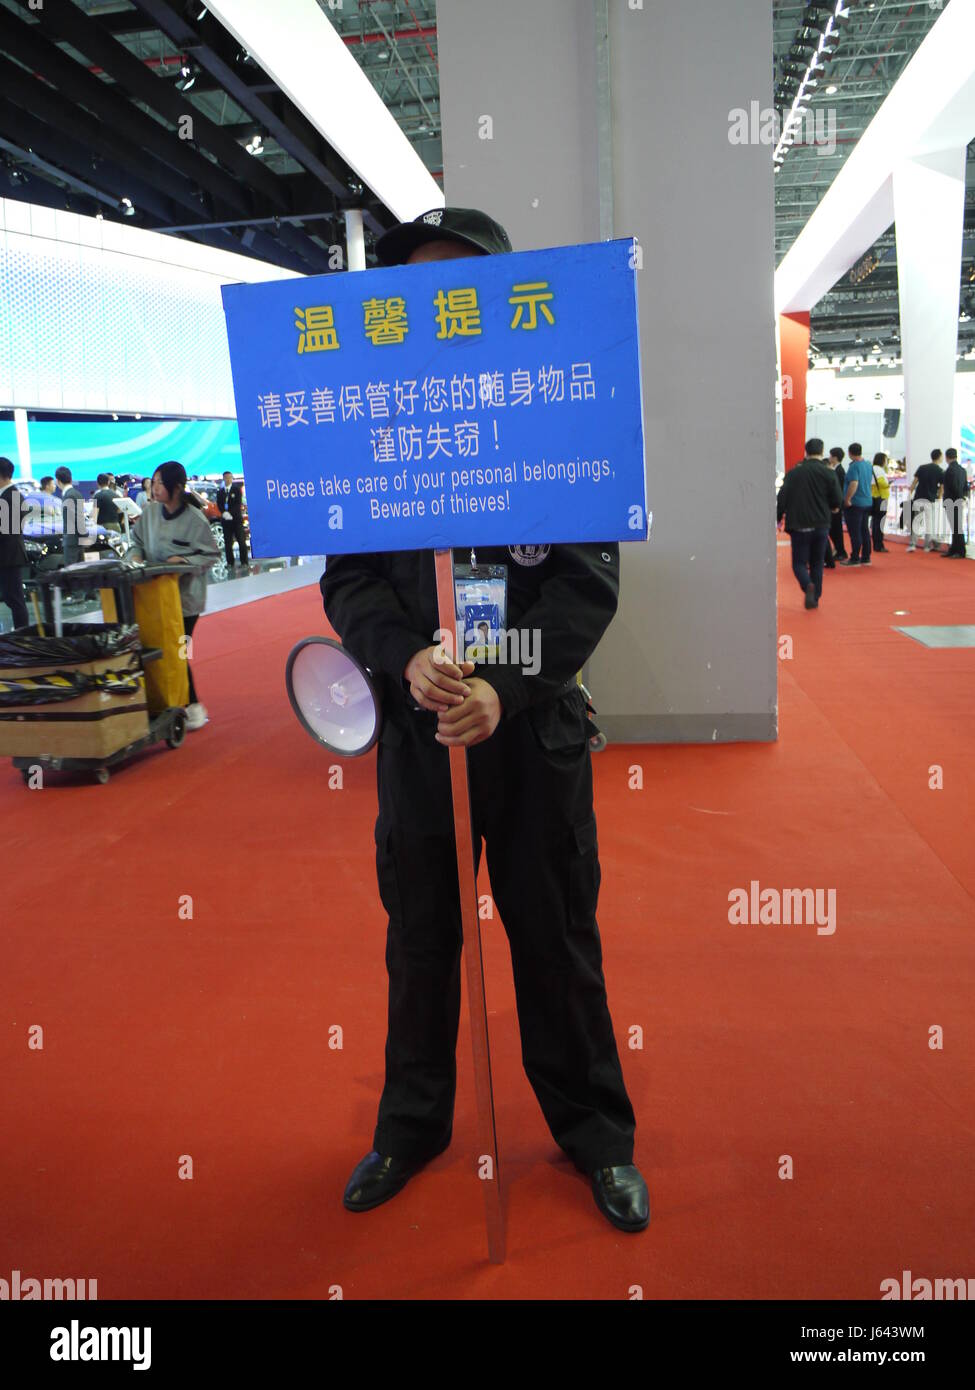 In Shanghai Motor Show, warning against thieves issued by the staff Stock Photo